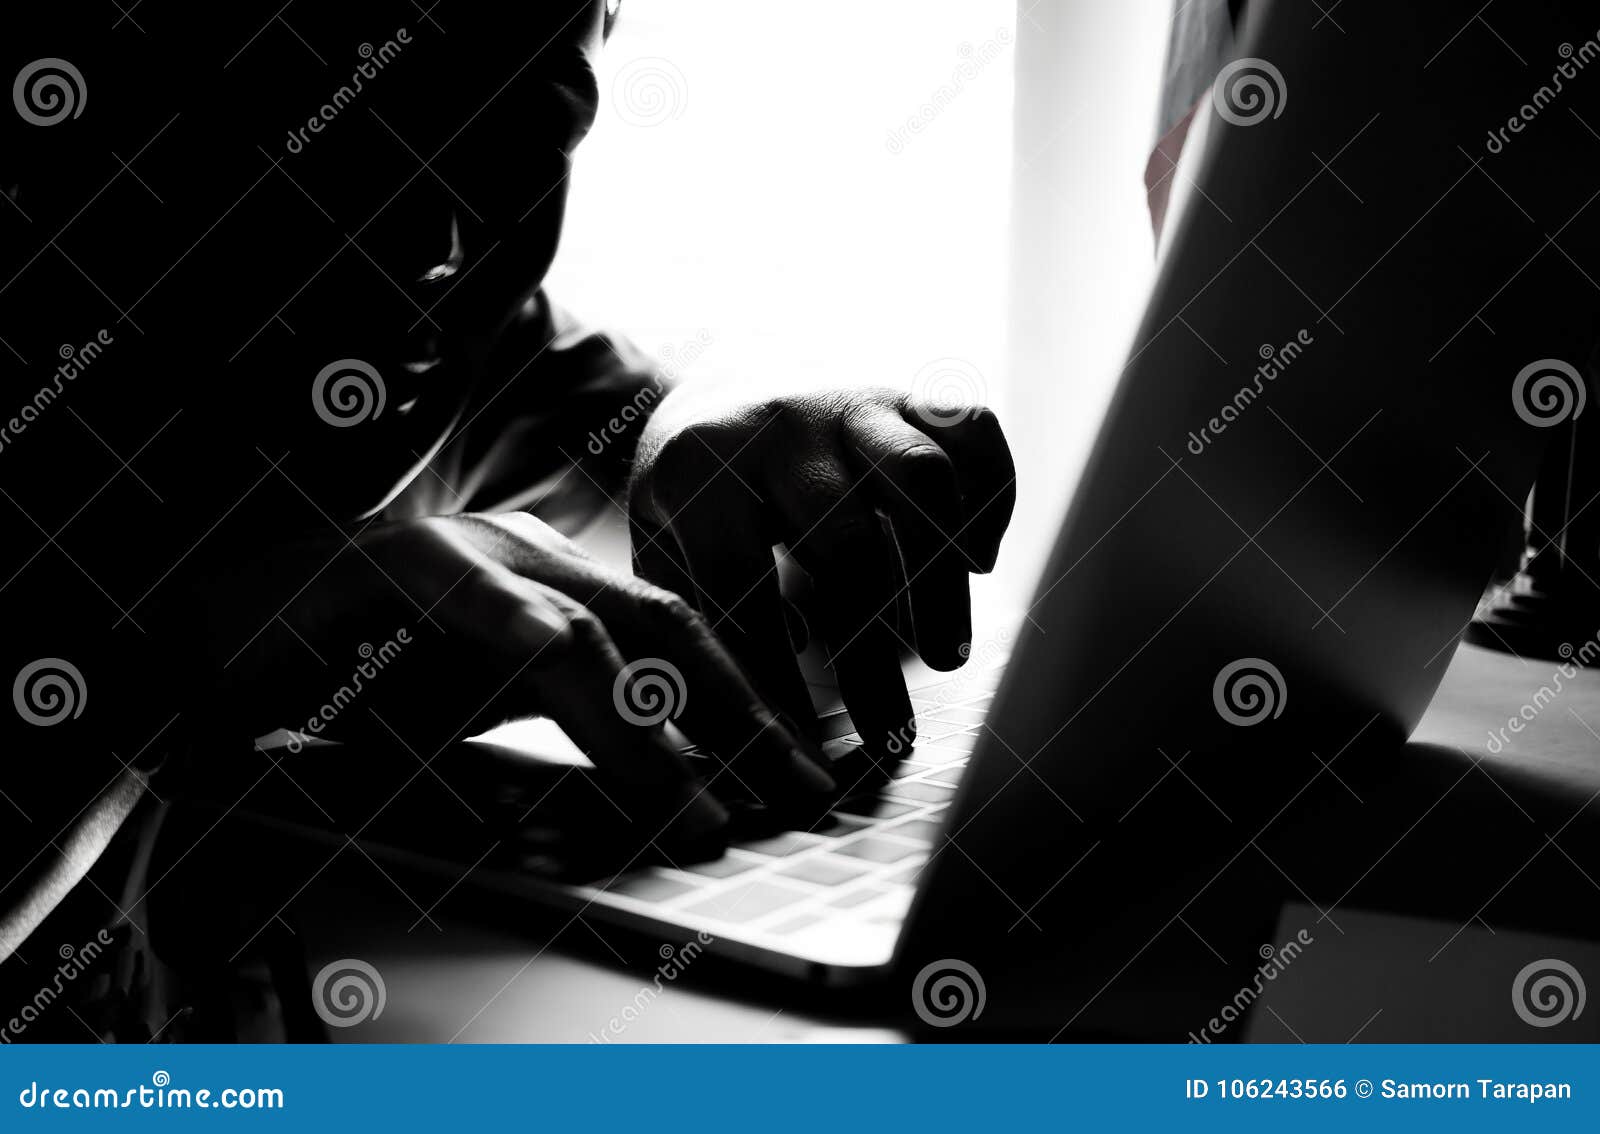 hackers with black mask using hands of anonymous typing code on